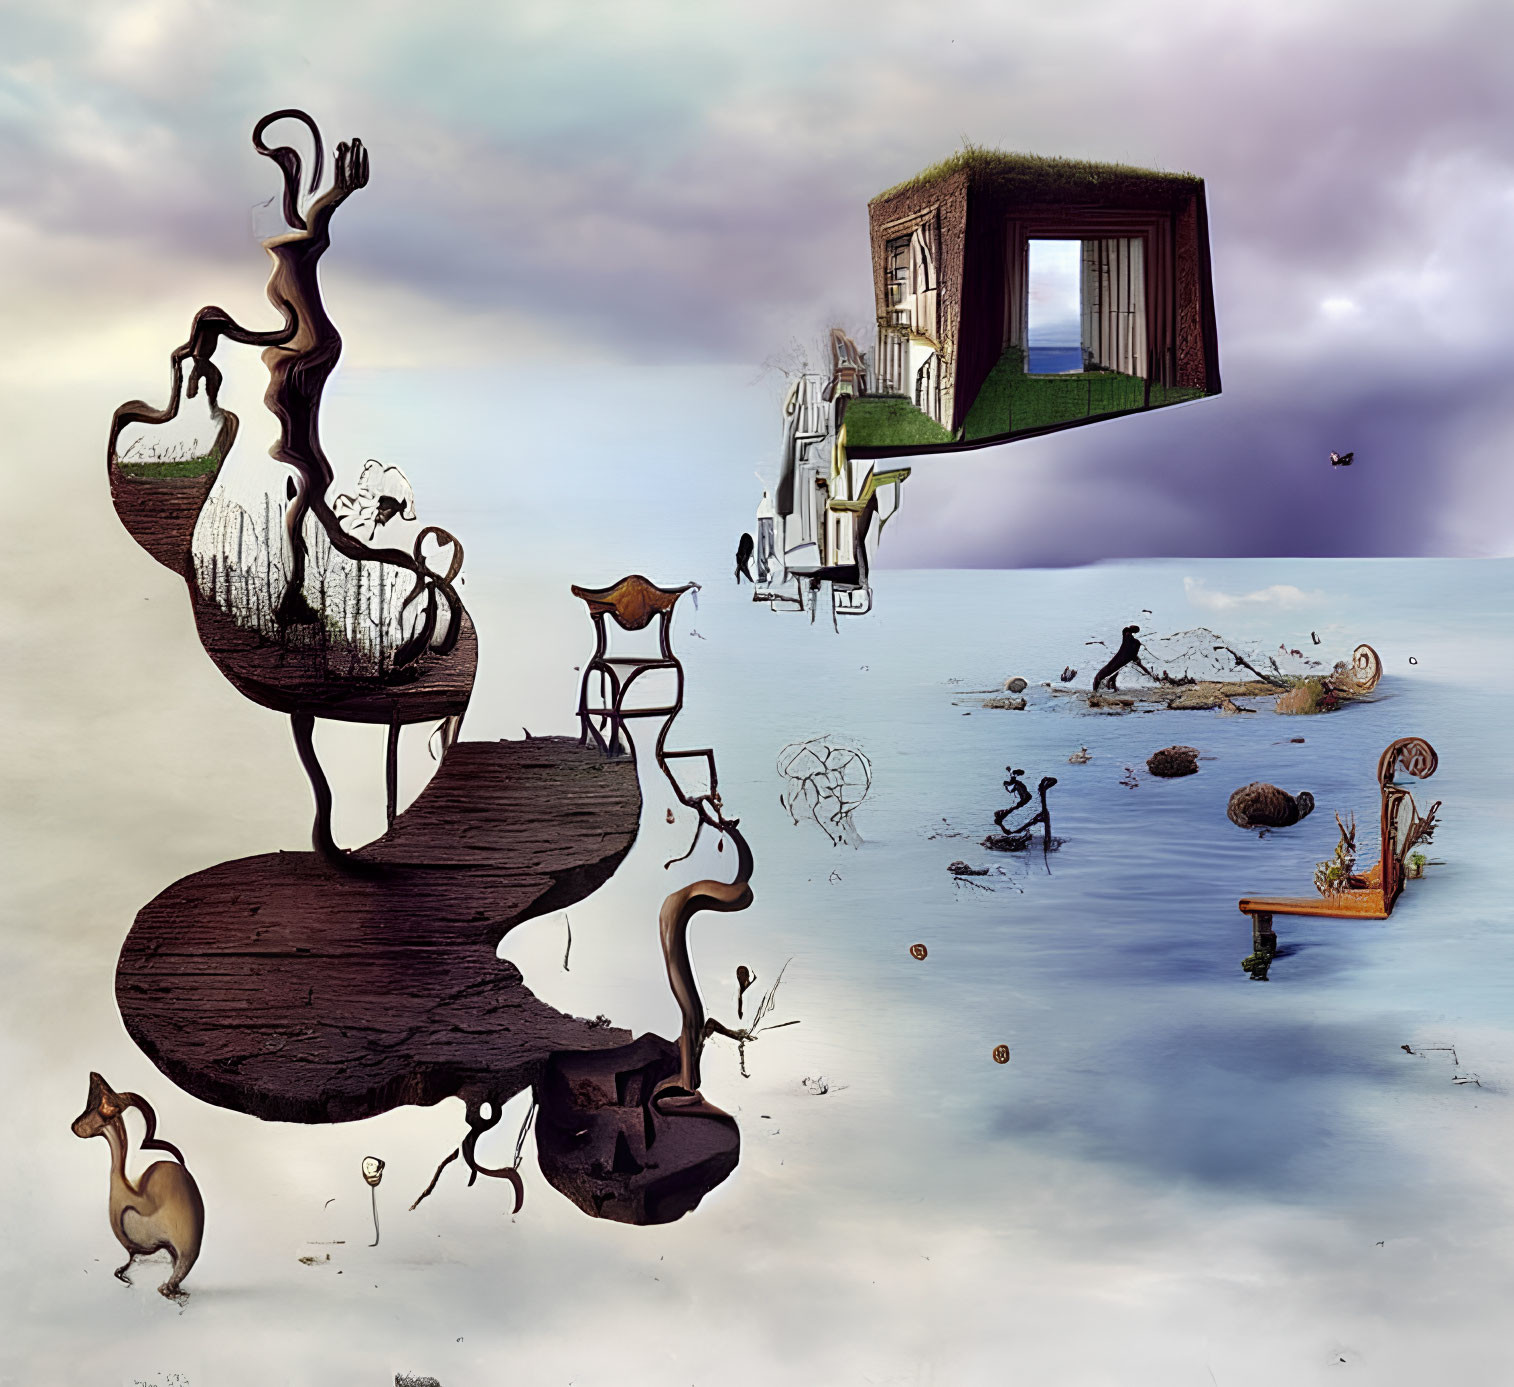 Surreal landscape with twisted pathway, levitating house, grass roof, floating objects, whimsical